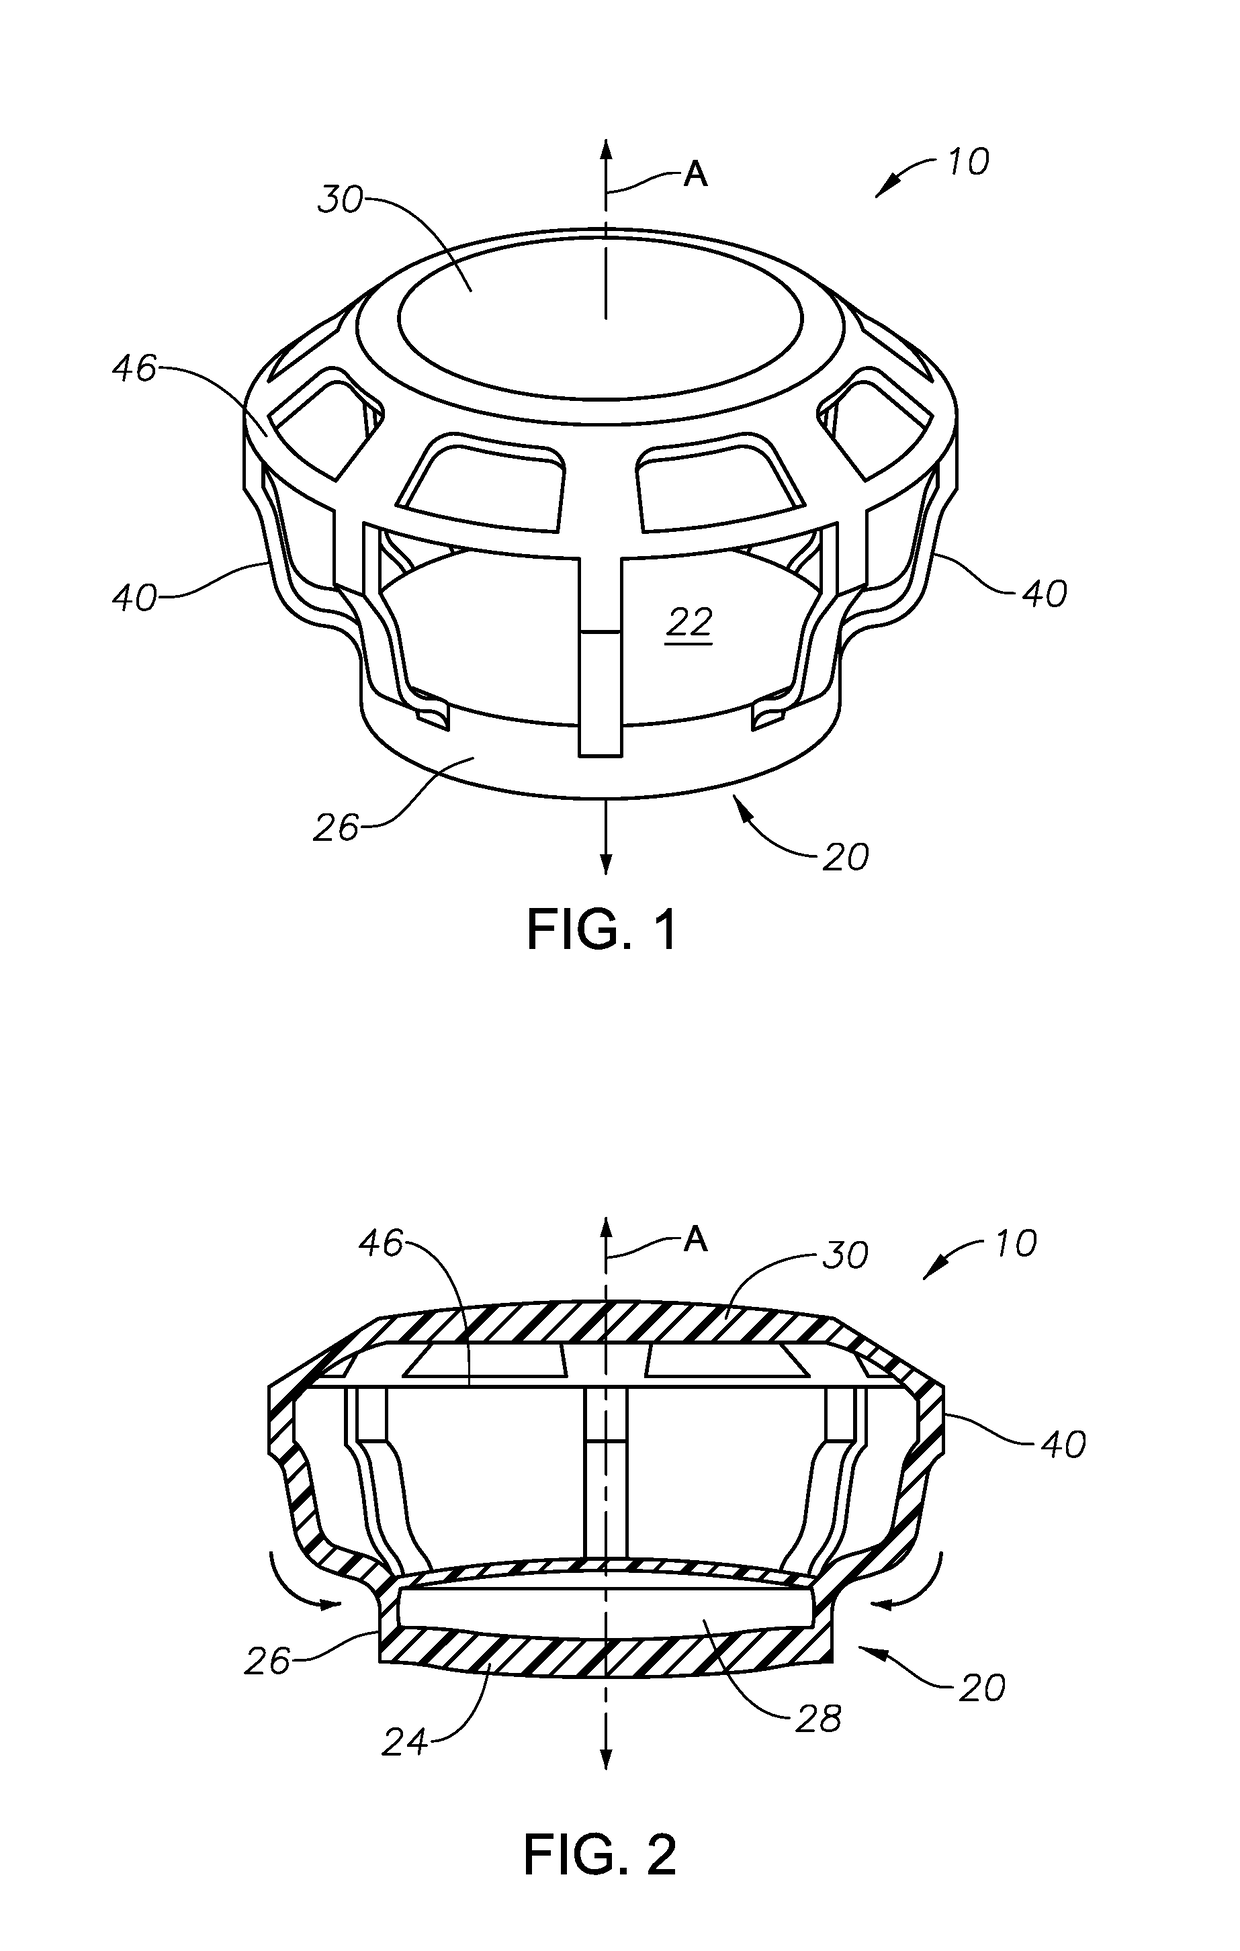 Dual optic, curvature changing accommodative iol having a fixed disaccommodated refractive state